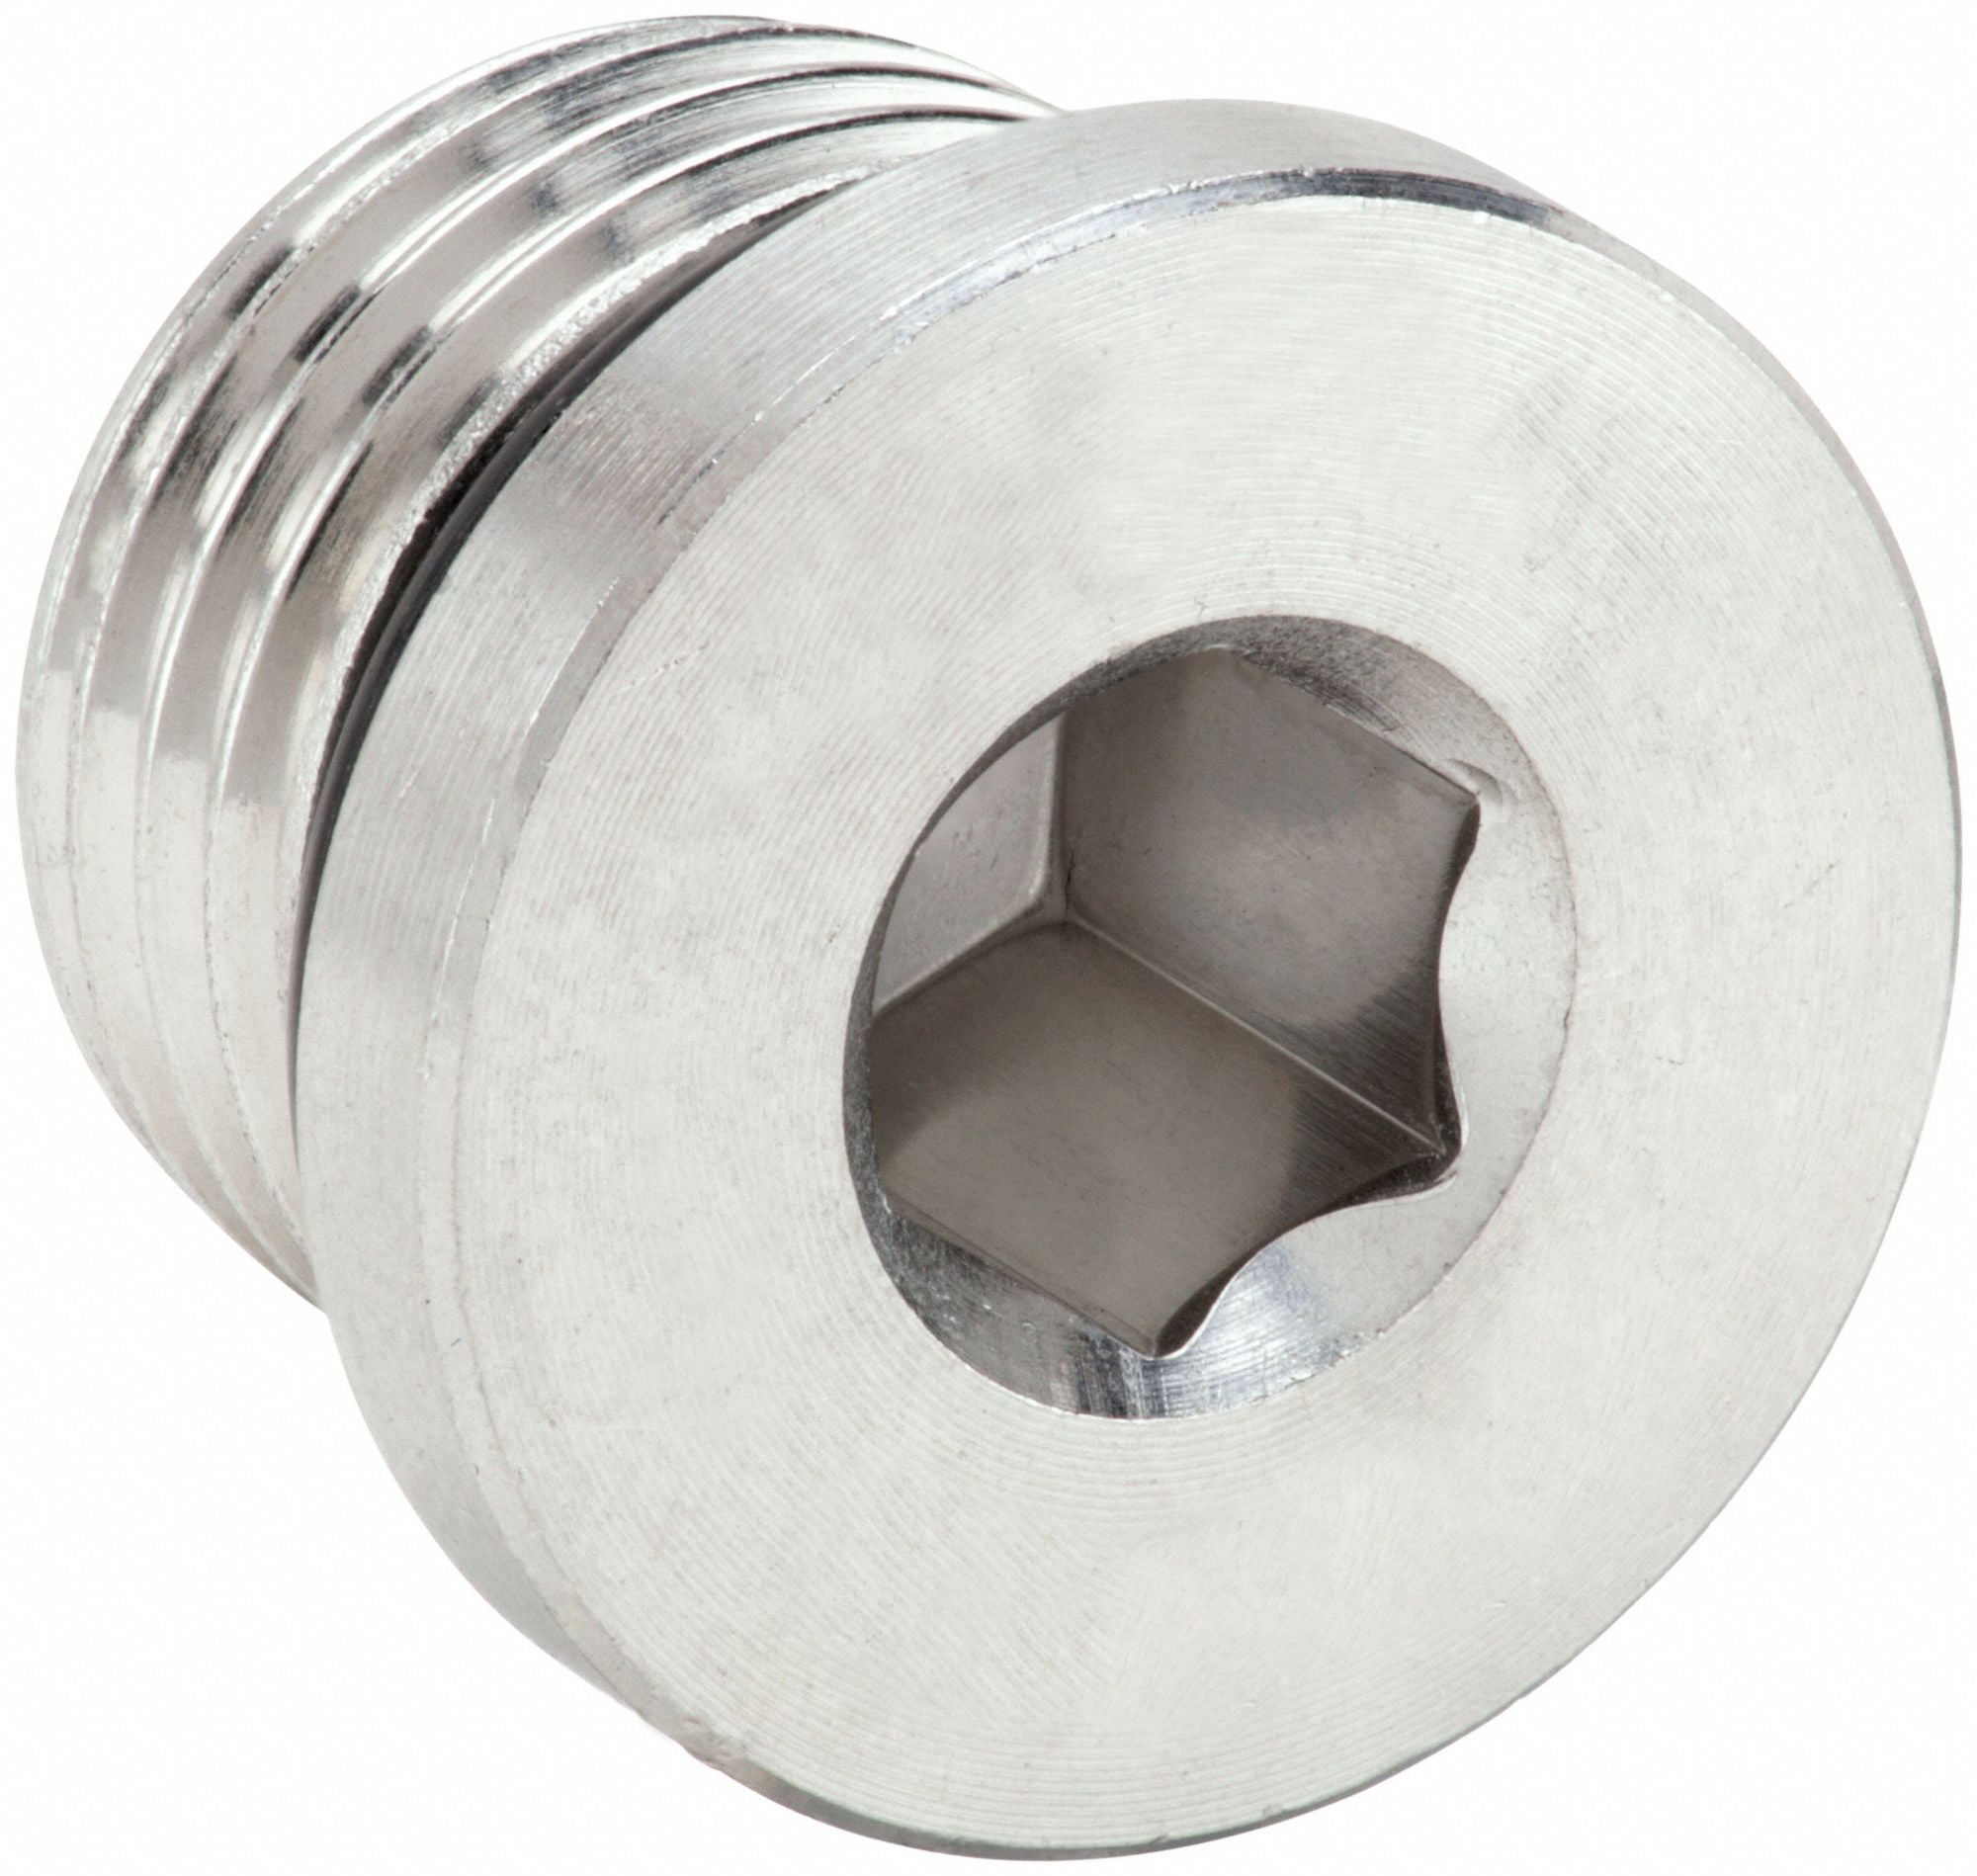 NPT Male Plug in 316 Stainless Steel American Threads 